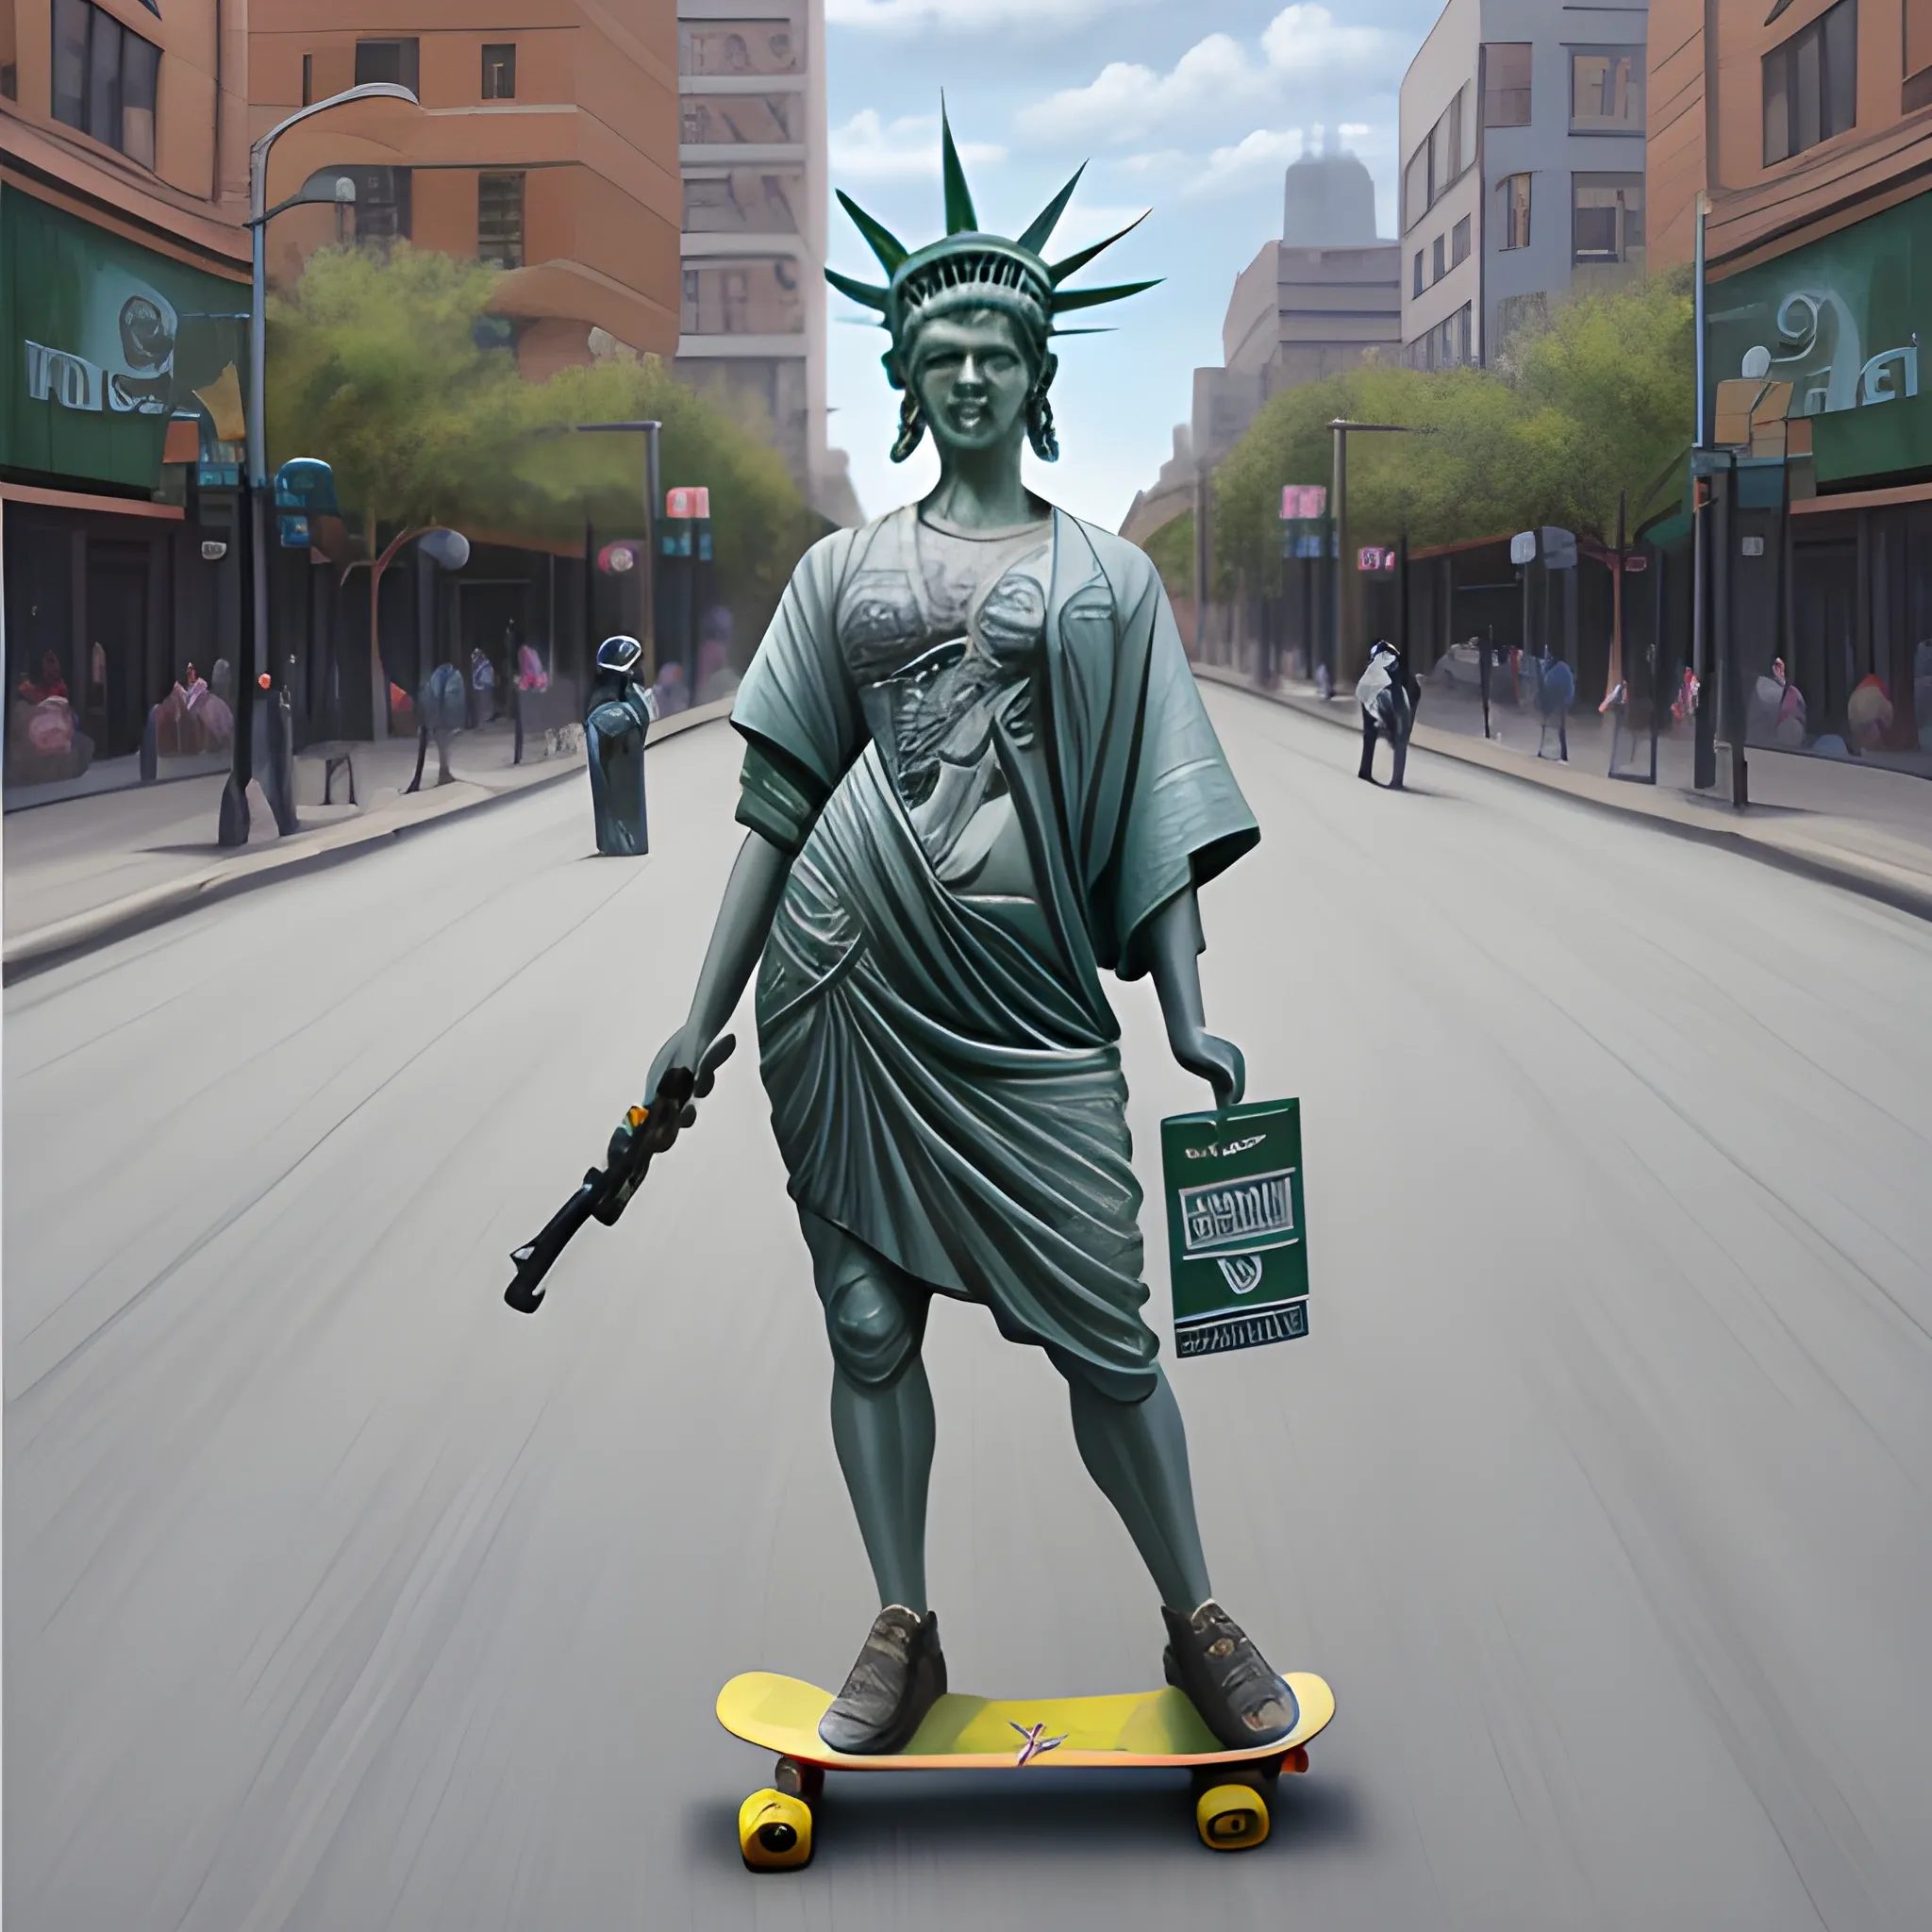 An androgynous Statue of Liberty riding a skateboard down an urban street, with a mohawk hairstyle, smoking a joint, carrying a gun, and wearing a Bitcoin half-shirt, photo realistic oil painting